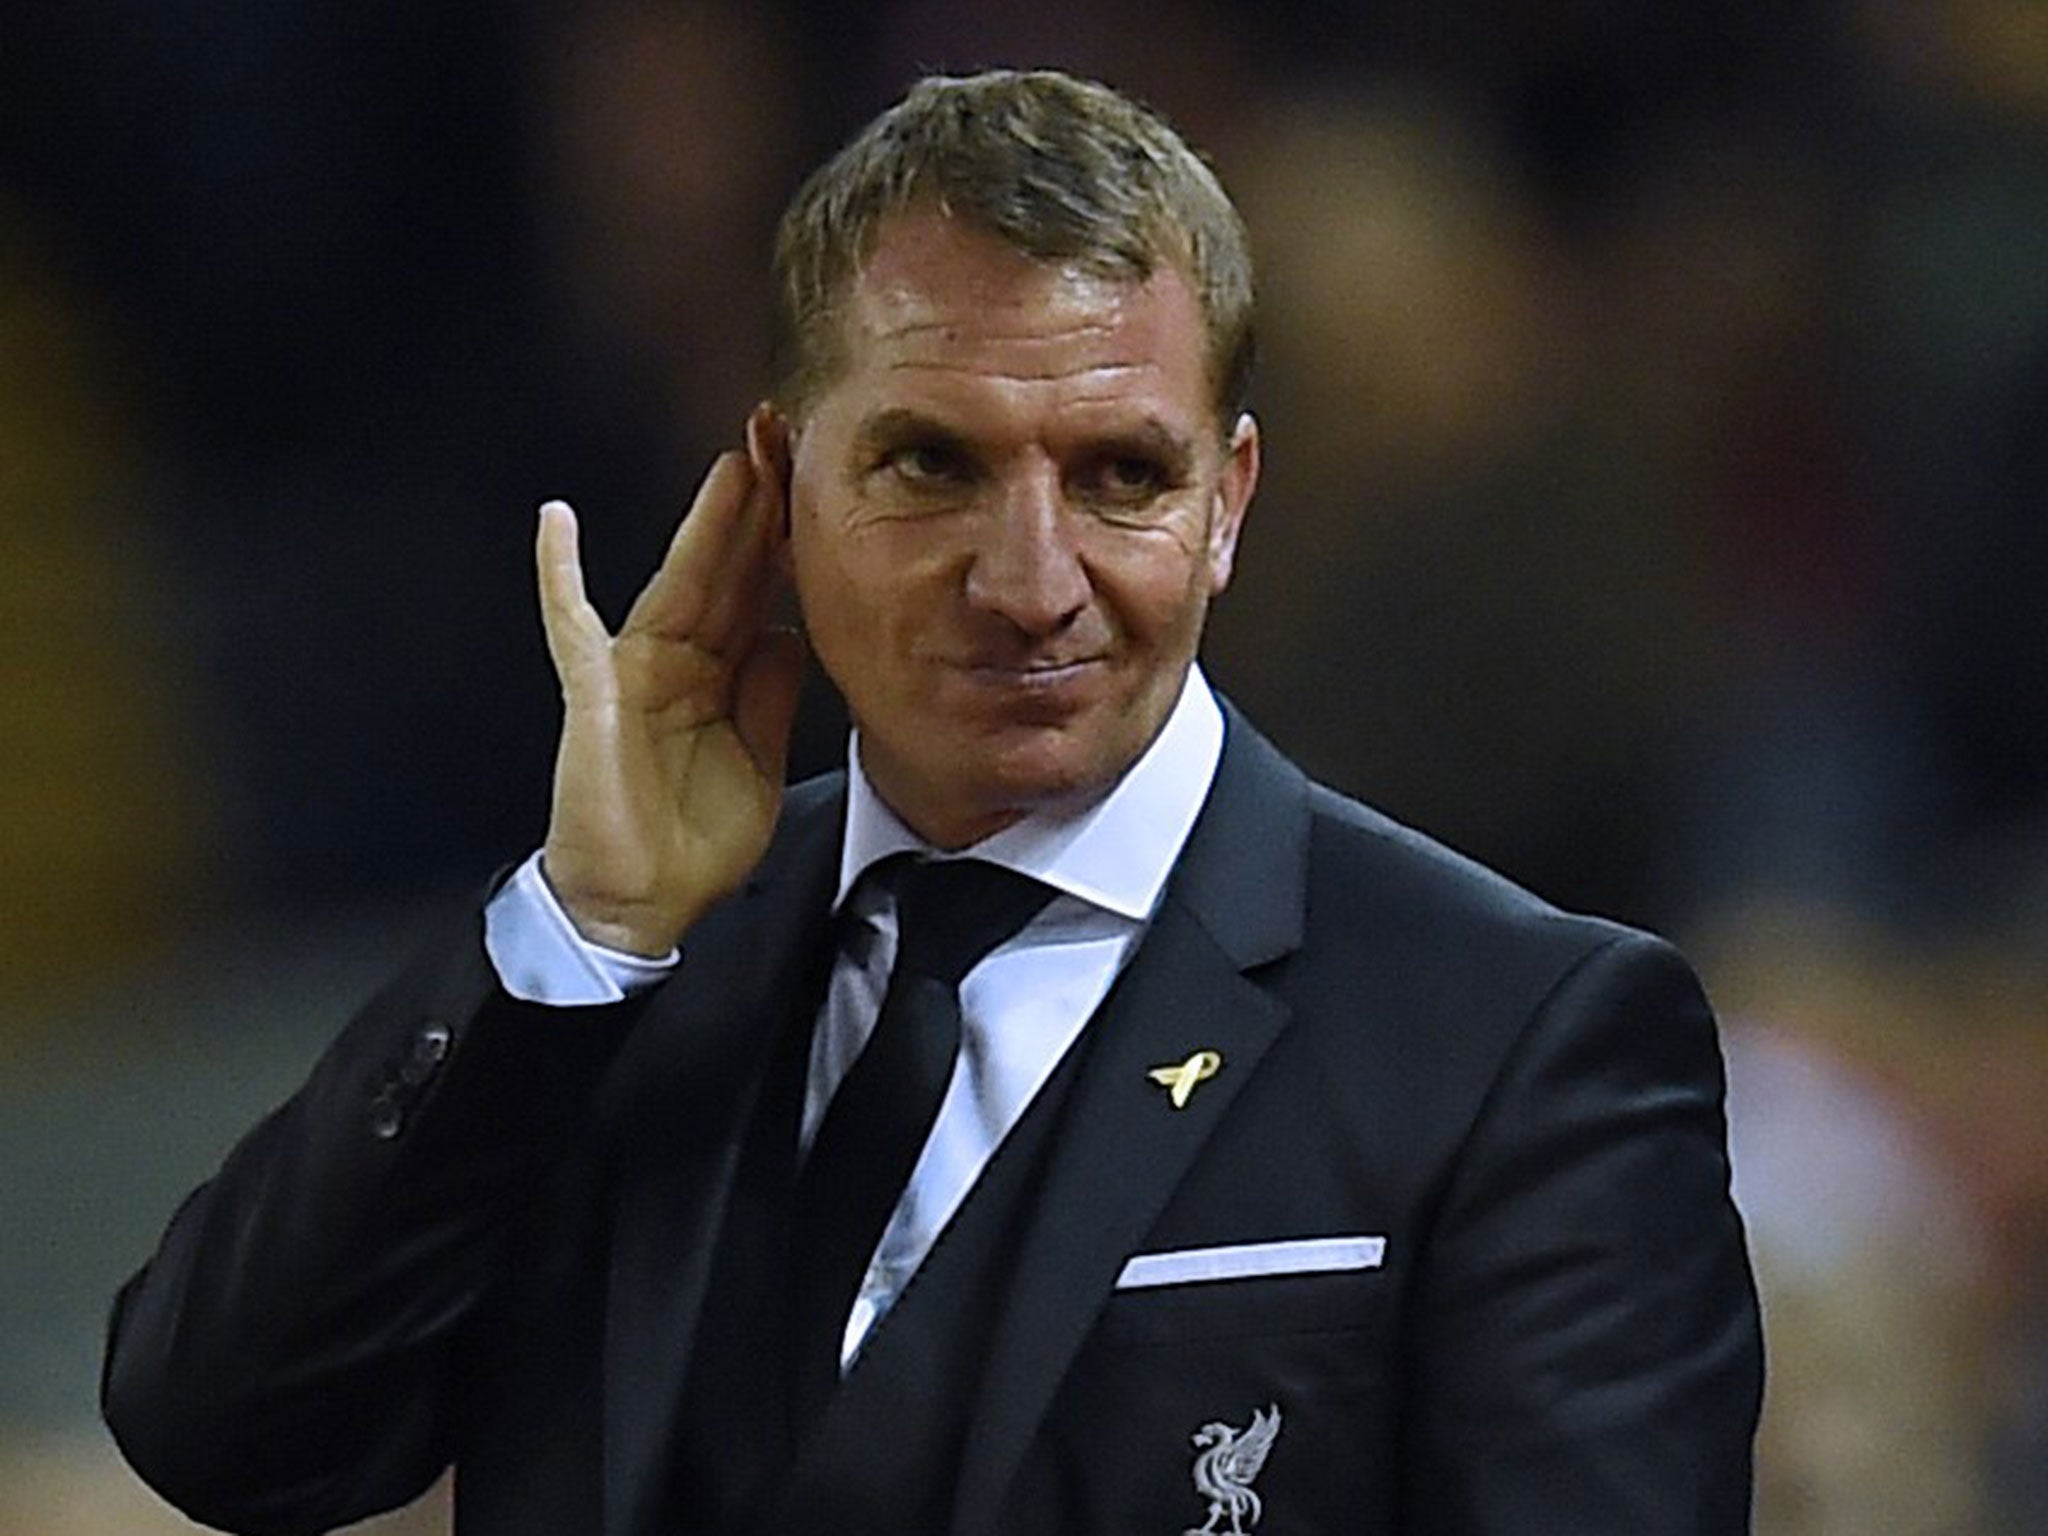 Former Liverpool manager Brendan Rodgers